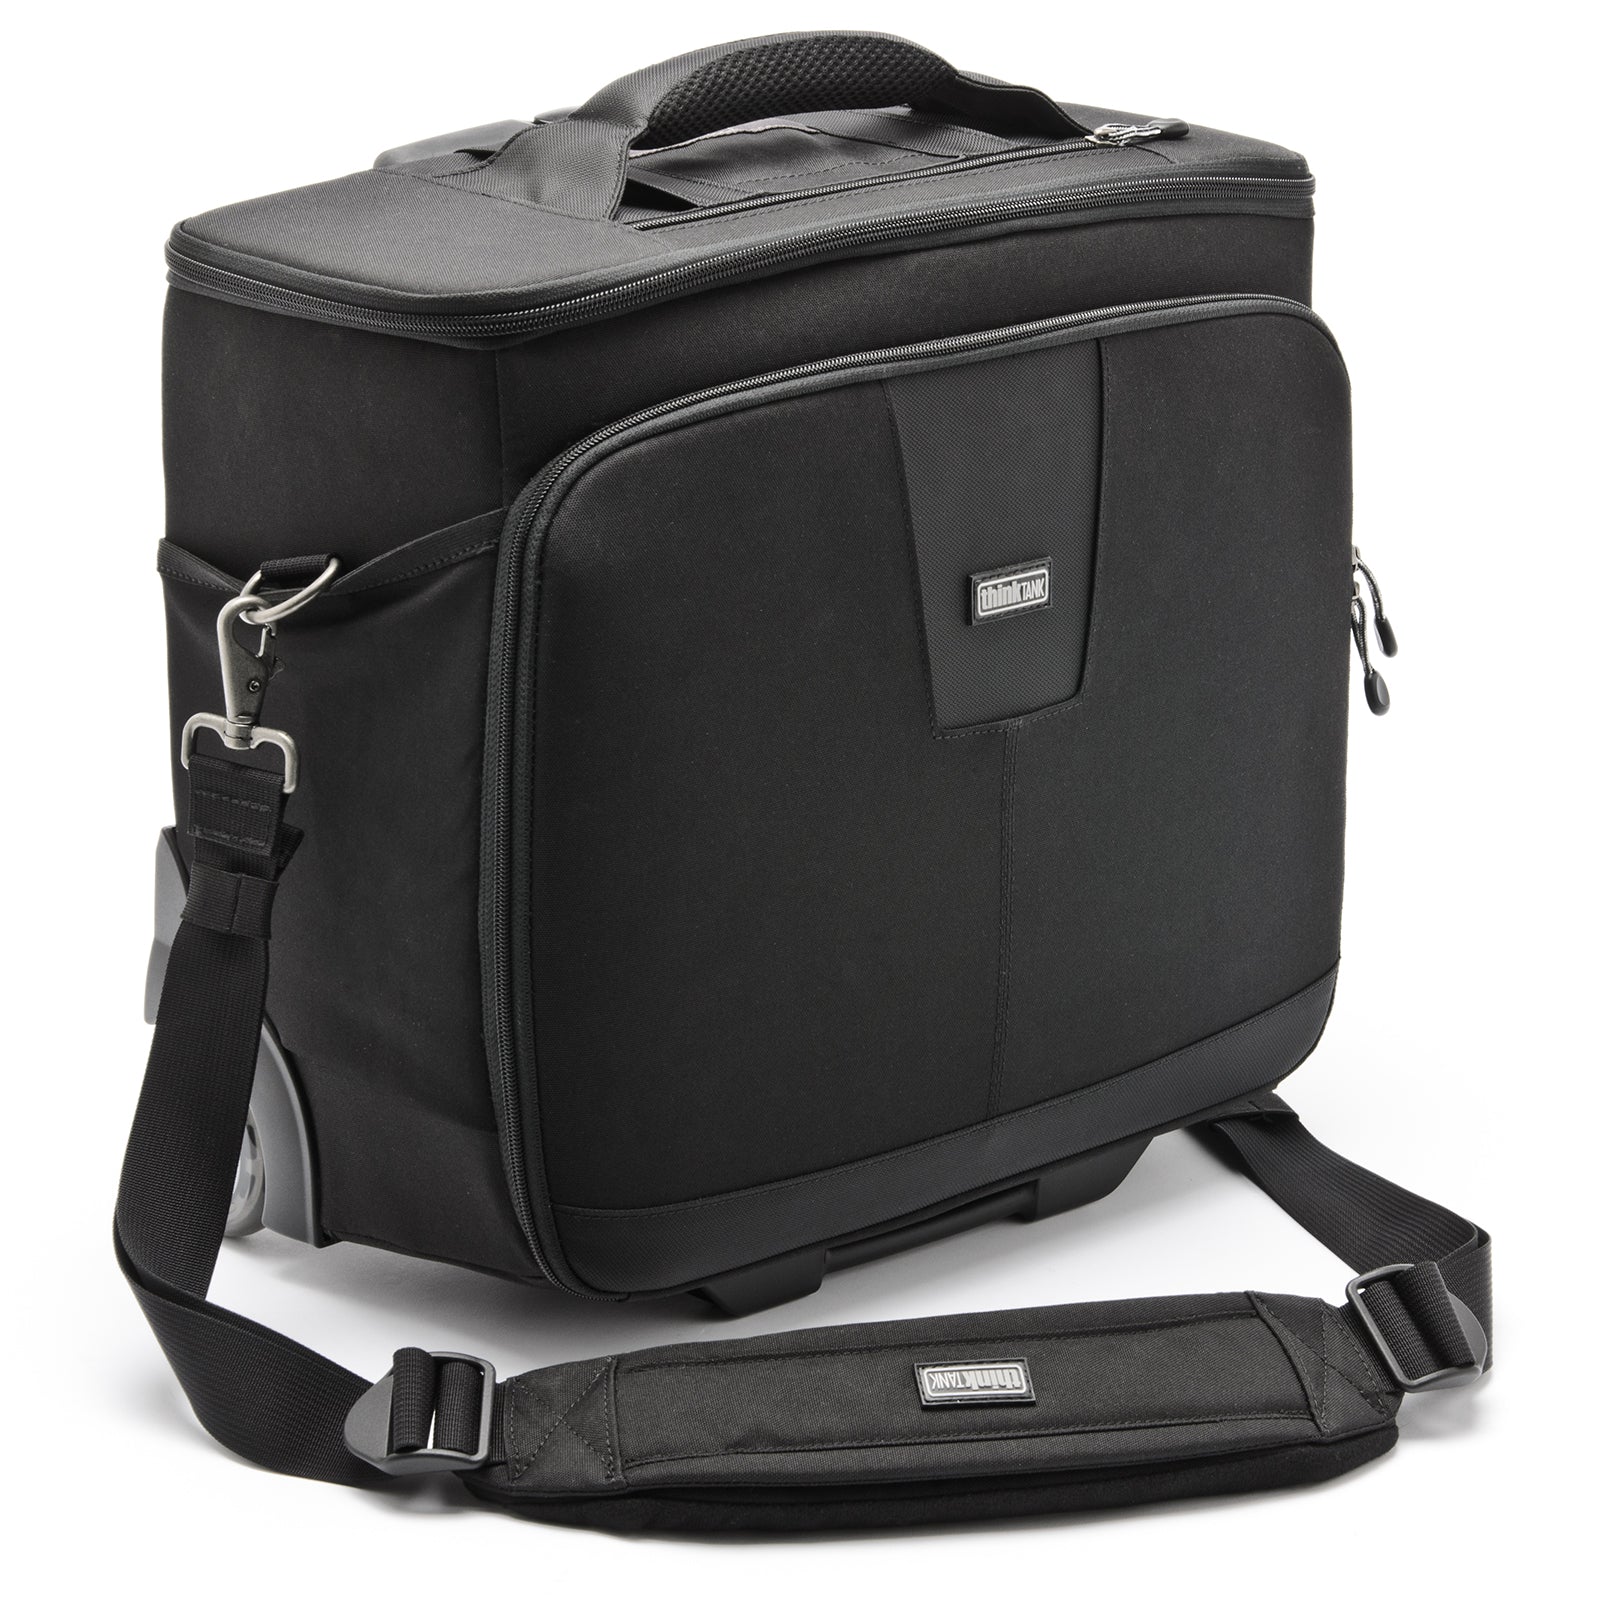 Shoulder strap included. Doubles as a piggy-back strap for attaching bag to rolling luggage